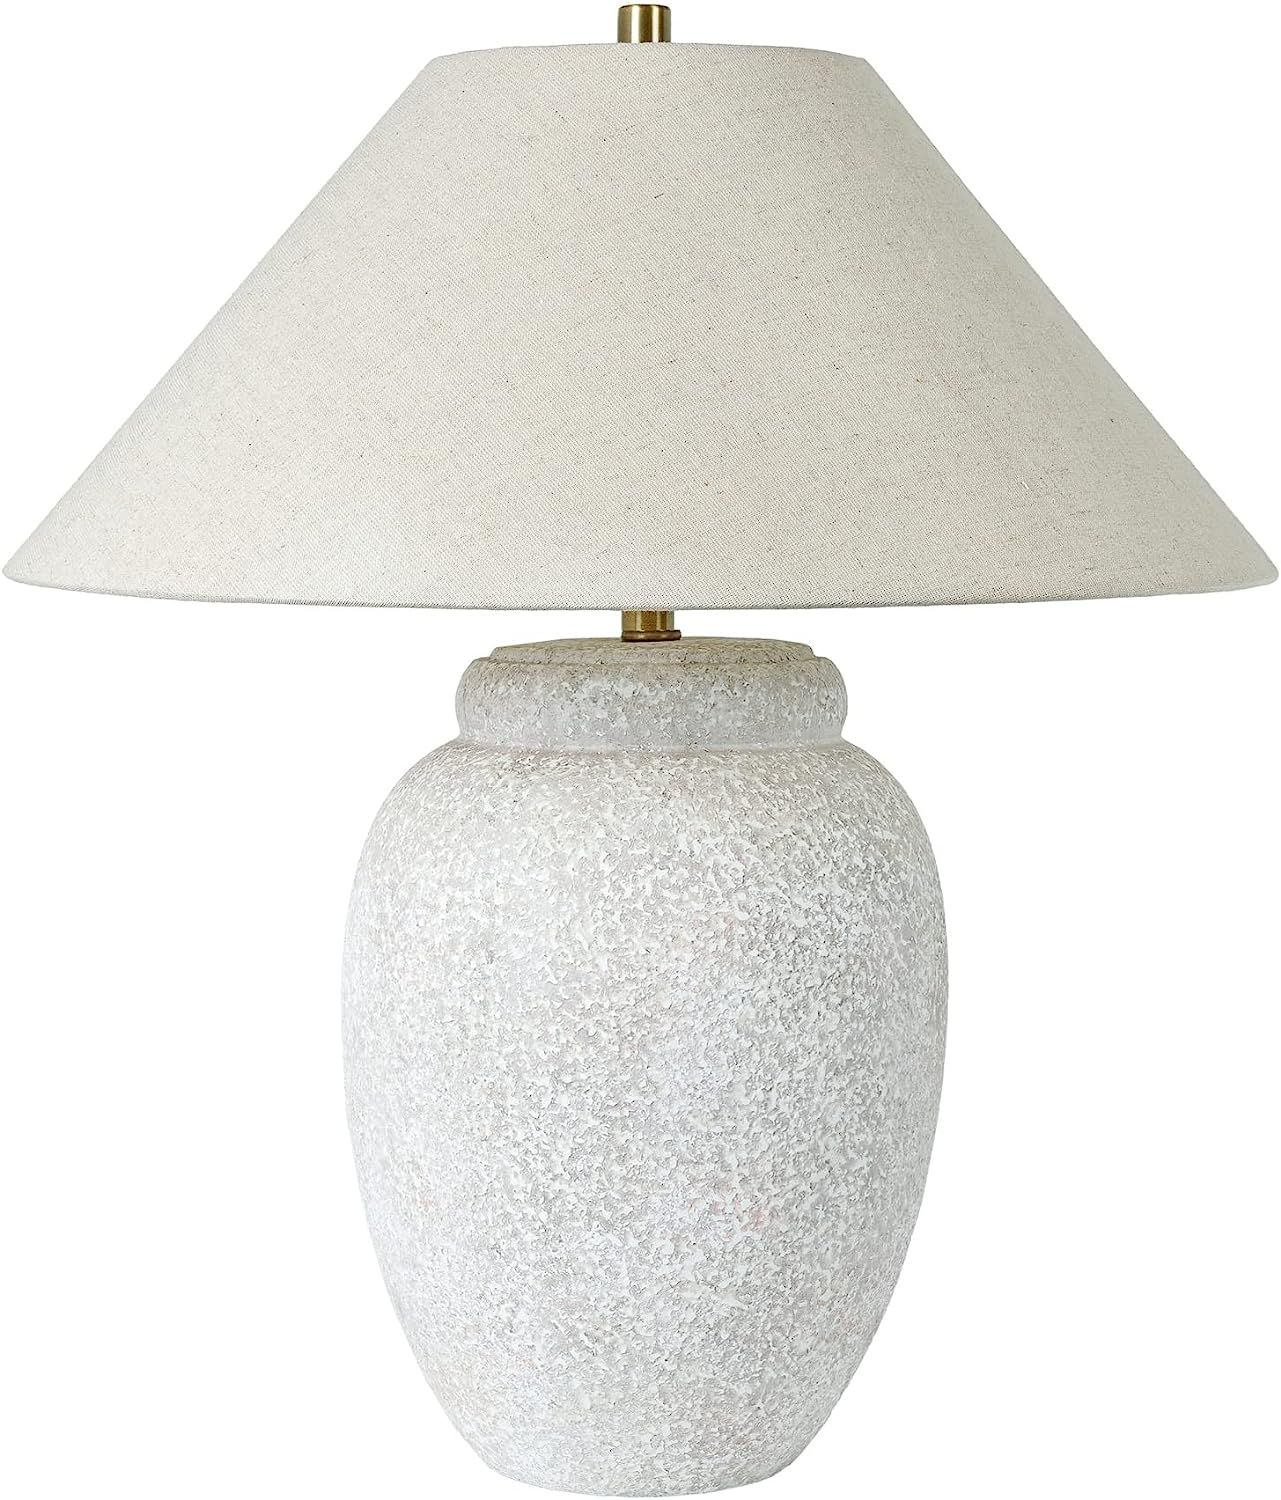 Traditional Ceramic Table Lamp 29" h X 23" w 23" d Brown White Transitional | Amazon (US)